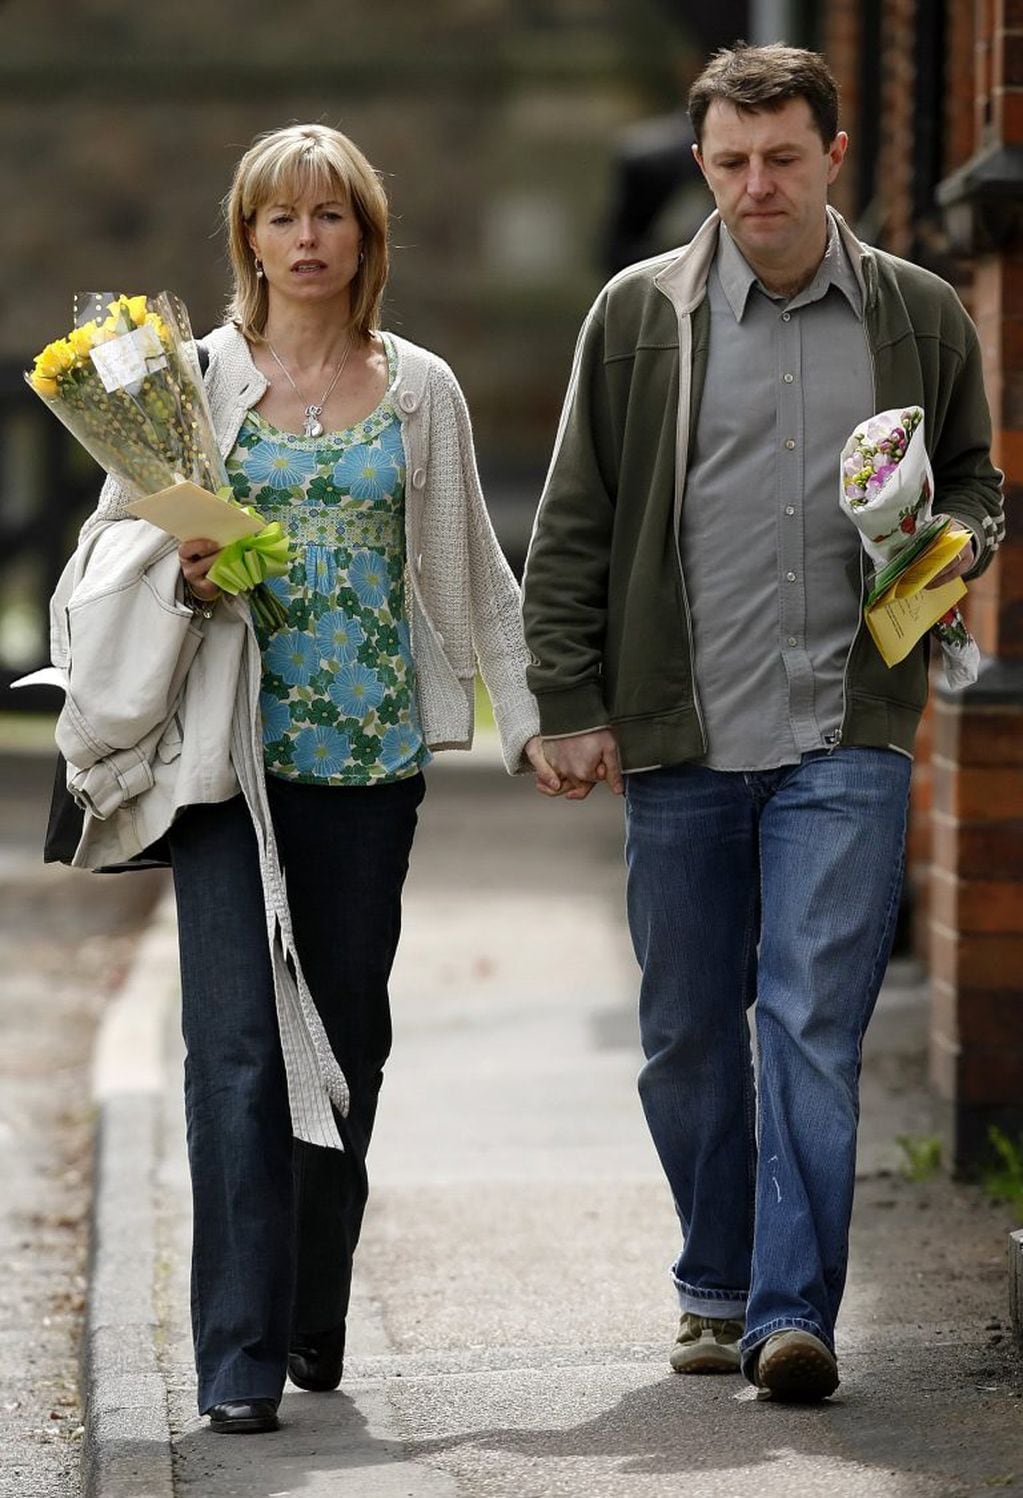 PORTUGAL-BRITAIN-MISSING-COURT-MCCANNS, - (FILES) Kate and Gerry McCann leave St Mary and St John Parish Church in the village of Rothley, Leicestershire, following a church service on the day of the first anniversary since the disappearance of their daug